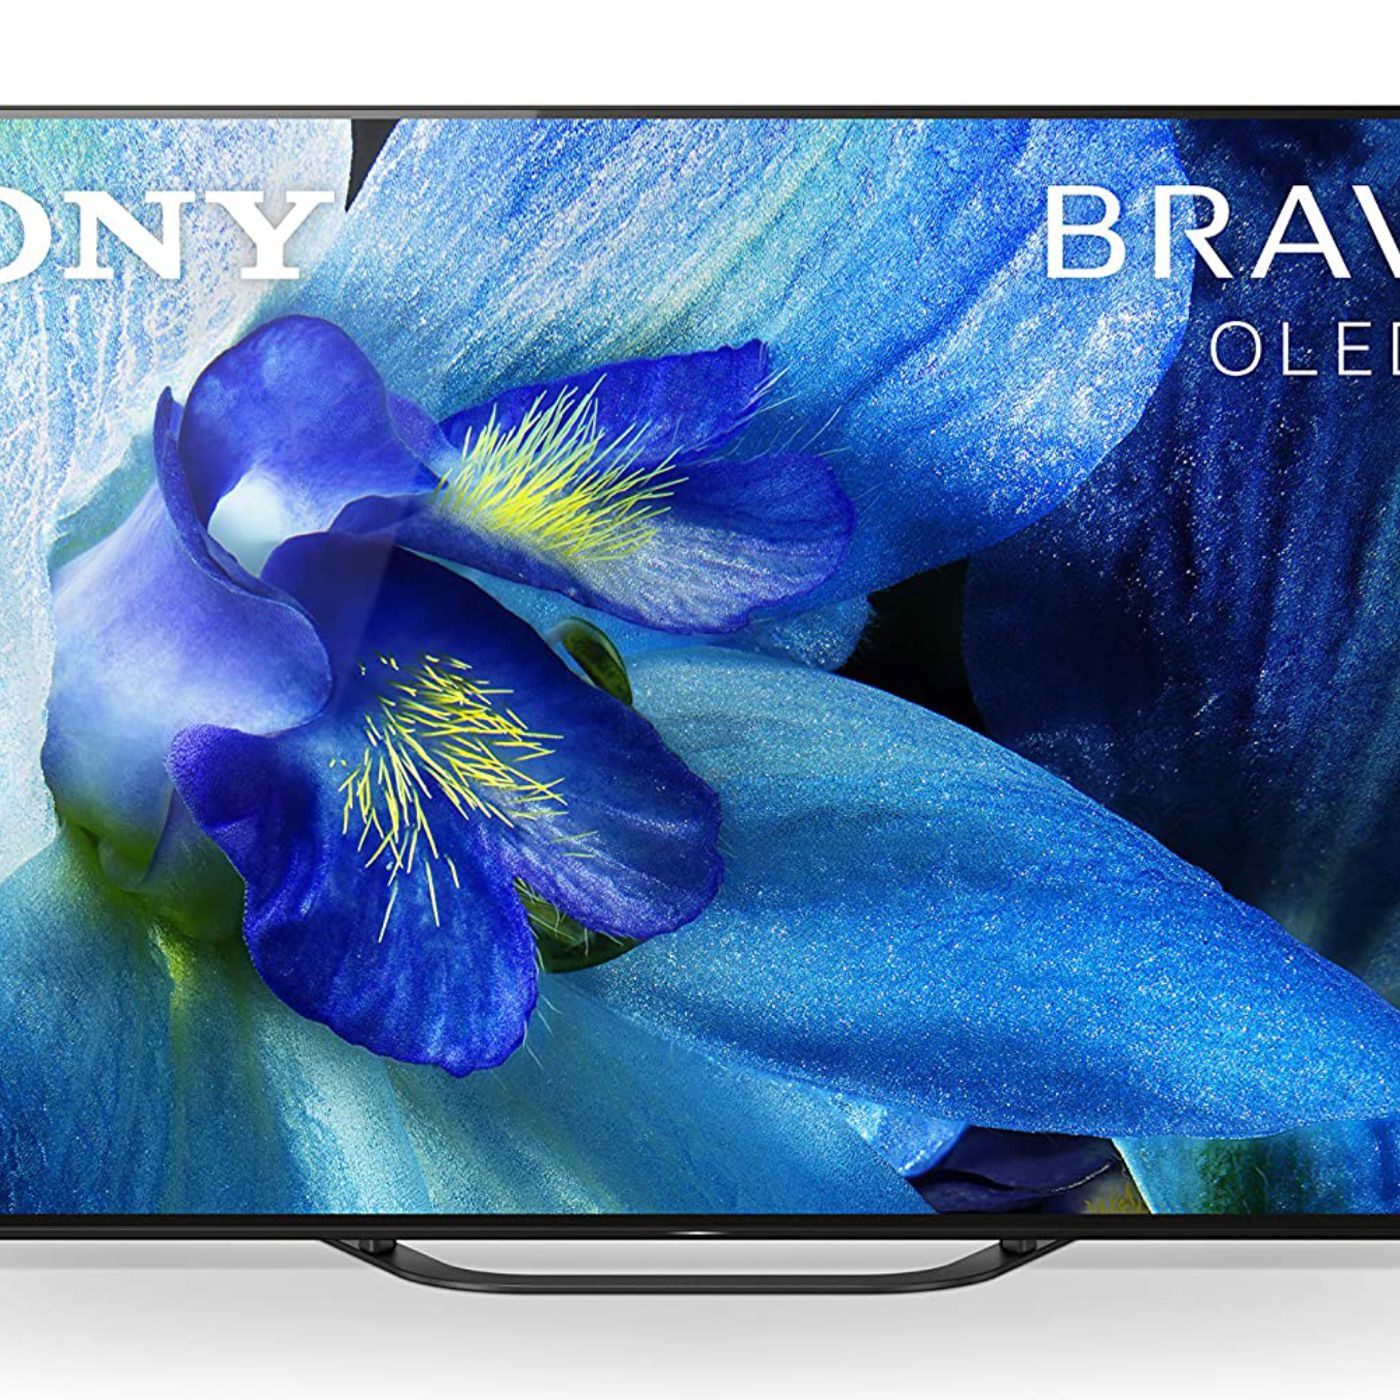 Prime Day 2020 Lightning Deal A 65 Inch Sony A8g Oled Tv For 1 500 The Verge